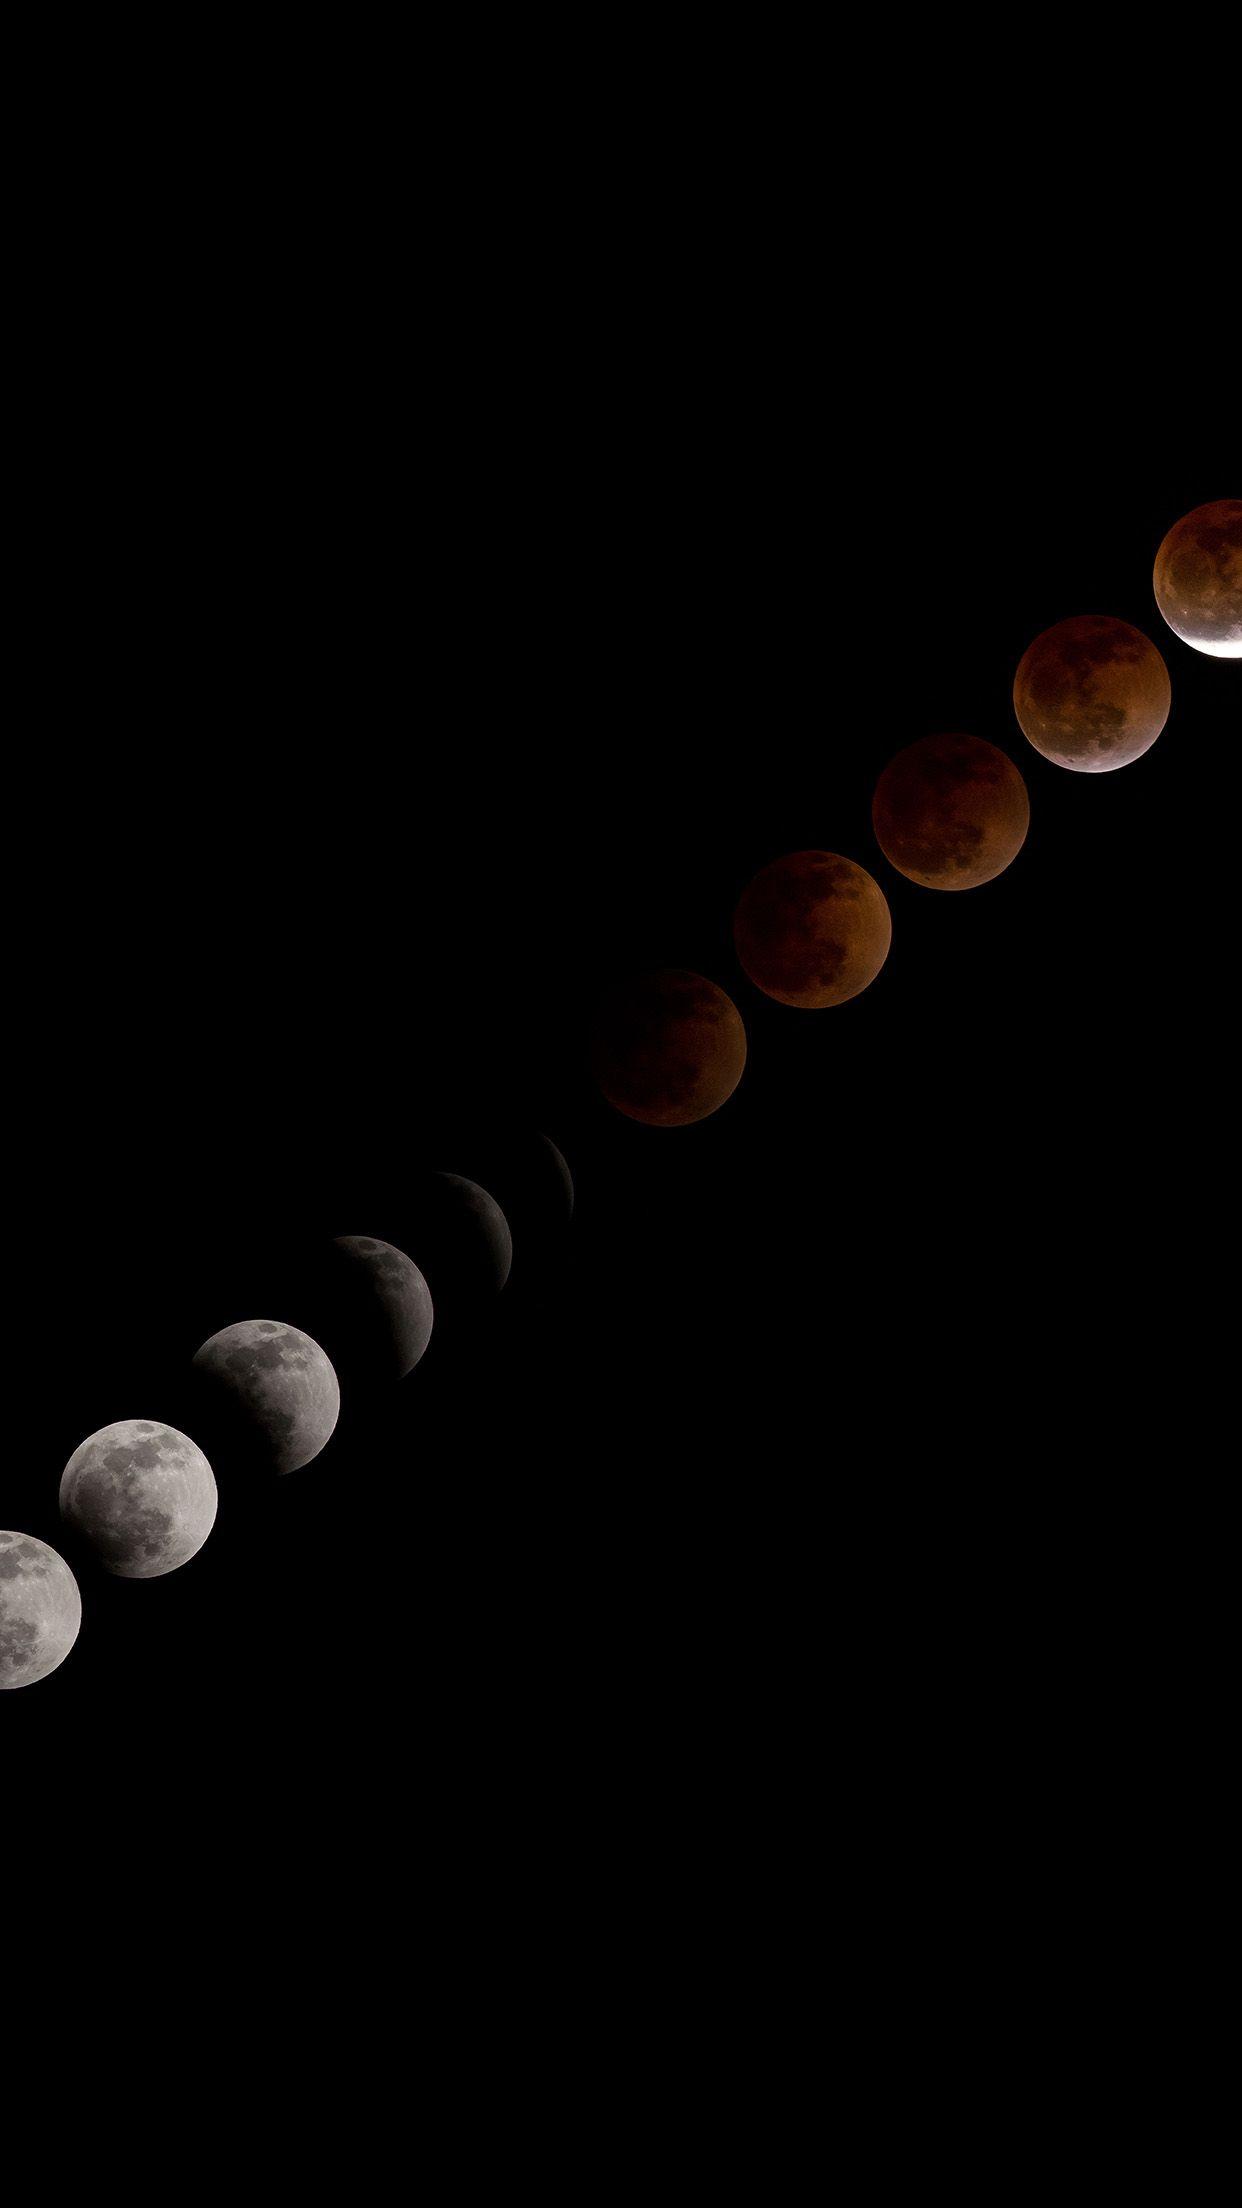 Blood Moon Lunar Eclipse Android wallpaper HD